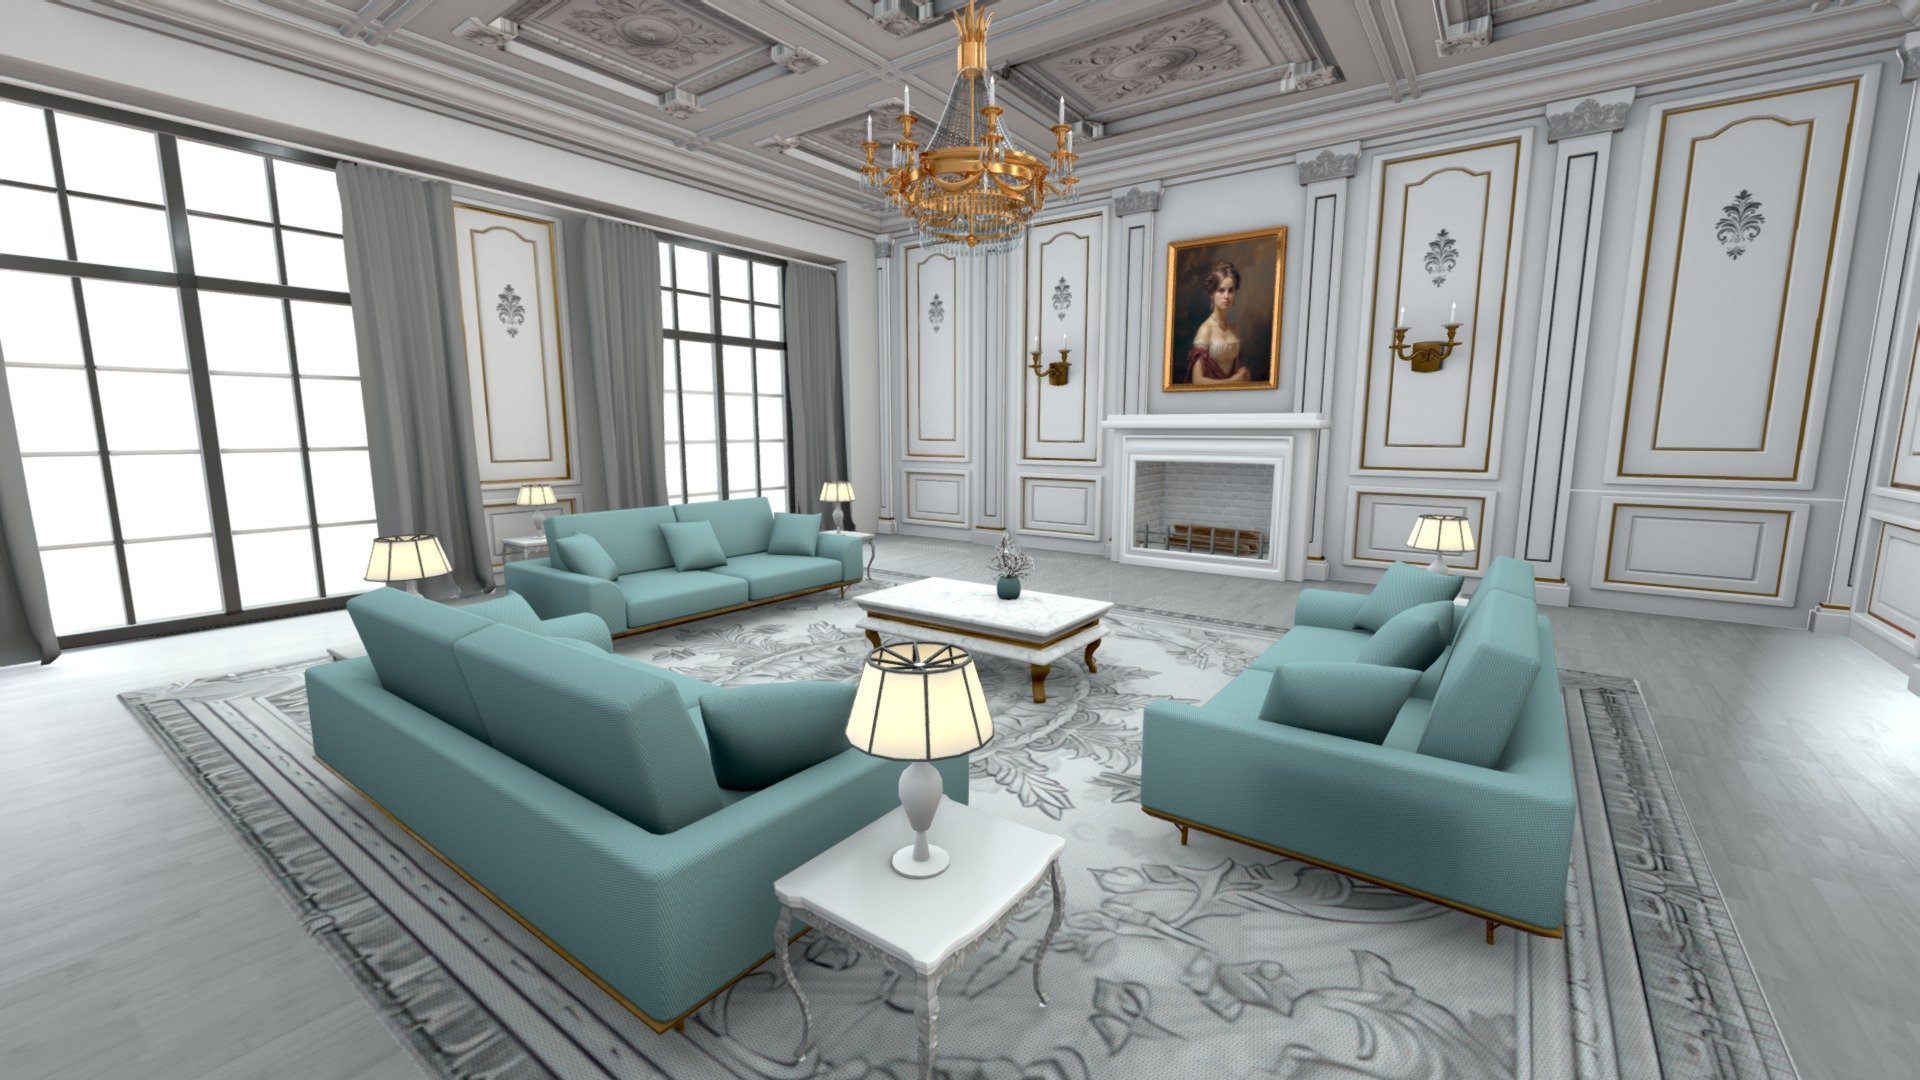 Introducing the Elegant Neoclassical Living Room, a 3D asset that seamlessly blends classical grandeur with modern comfort. With its meticulously crafted proportions, ornate moldings, and columns, this asset exudes historical charm. The gold accents add a layer of opulence, while the grand chandelier crowns the space with grace. Perfect for architectural visualizations, interior design simulations, or historical scenes, this versatile asset is a must-have for creators seeking to transport their audience to a realm of timeless elegance 3d model